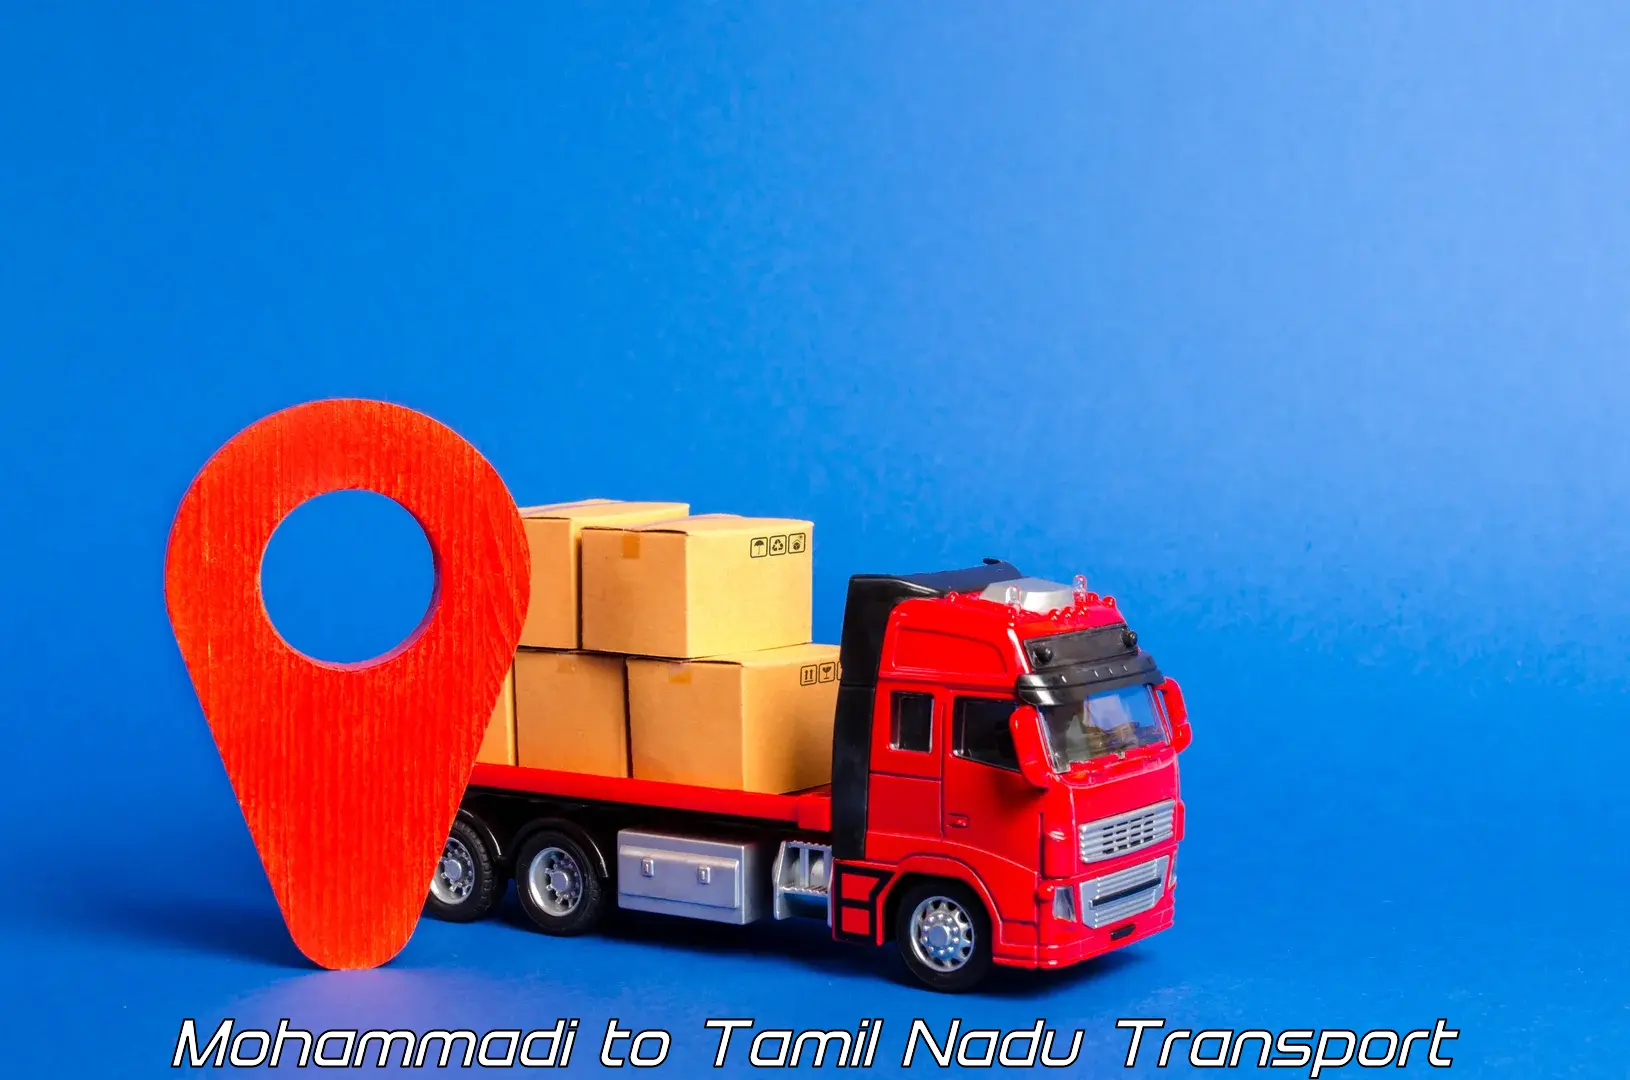 Vehicle transport services in Mohammadi to Tamil Nadu